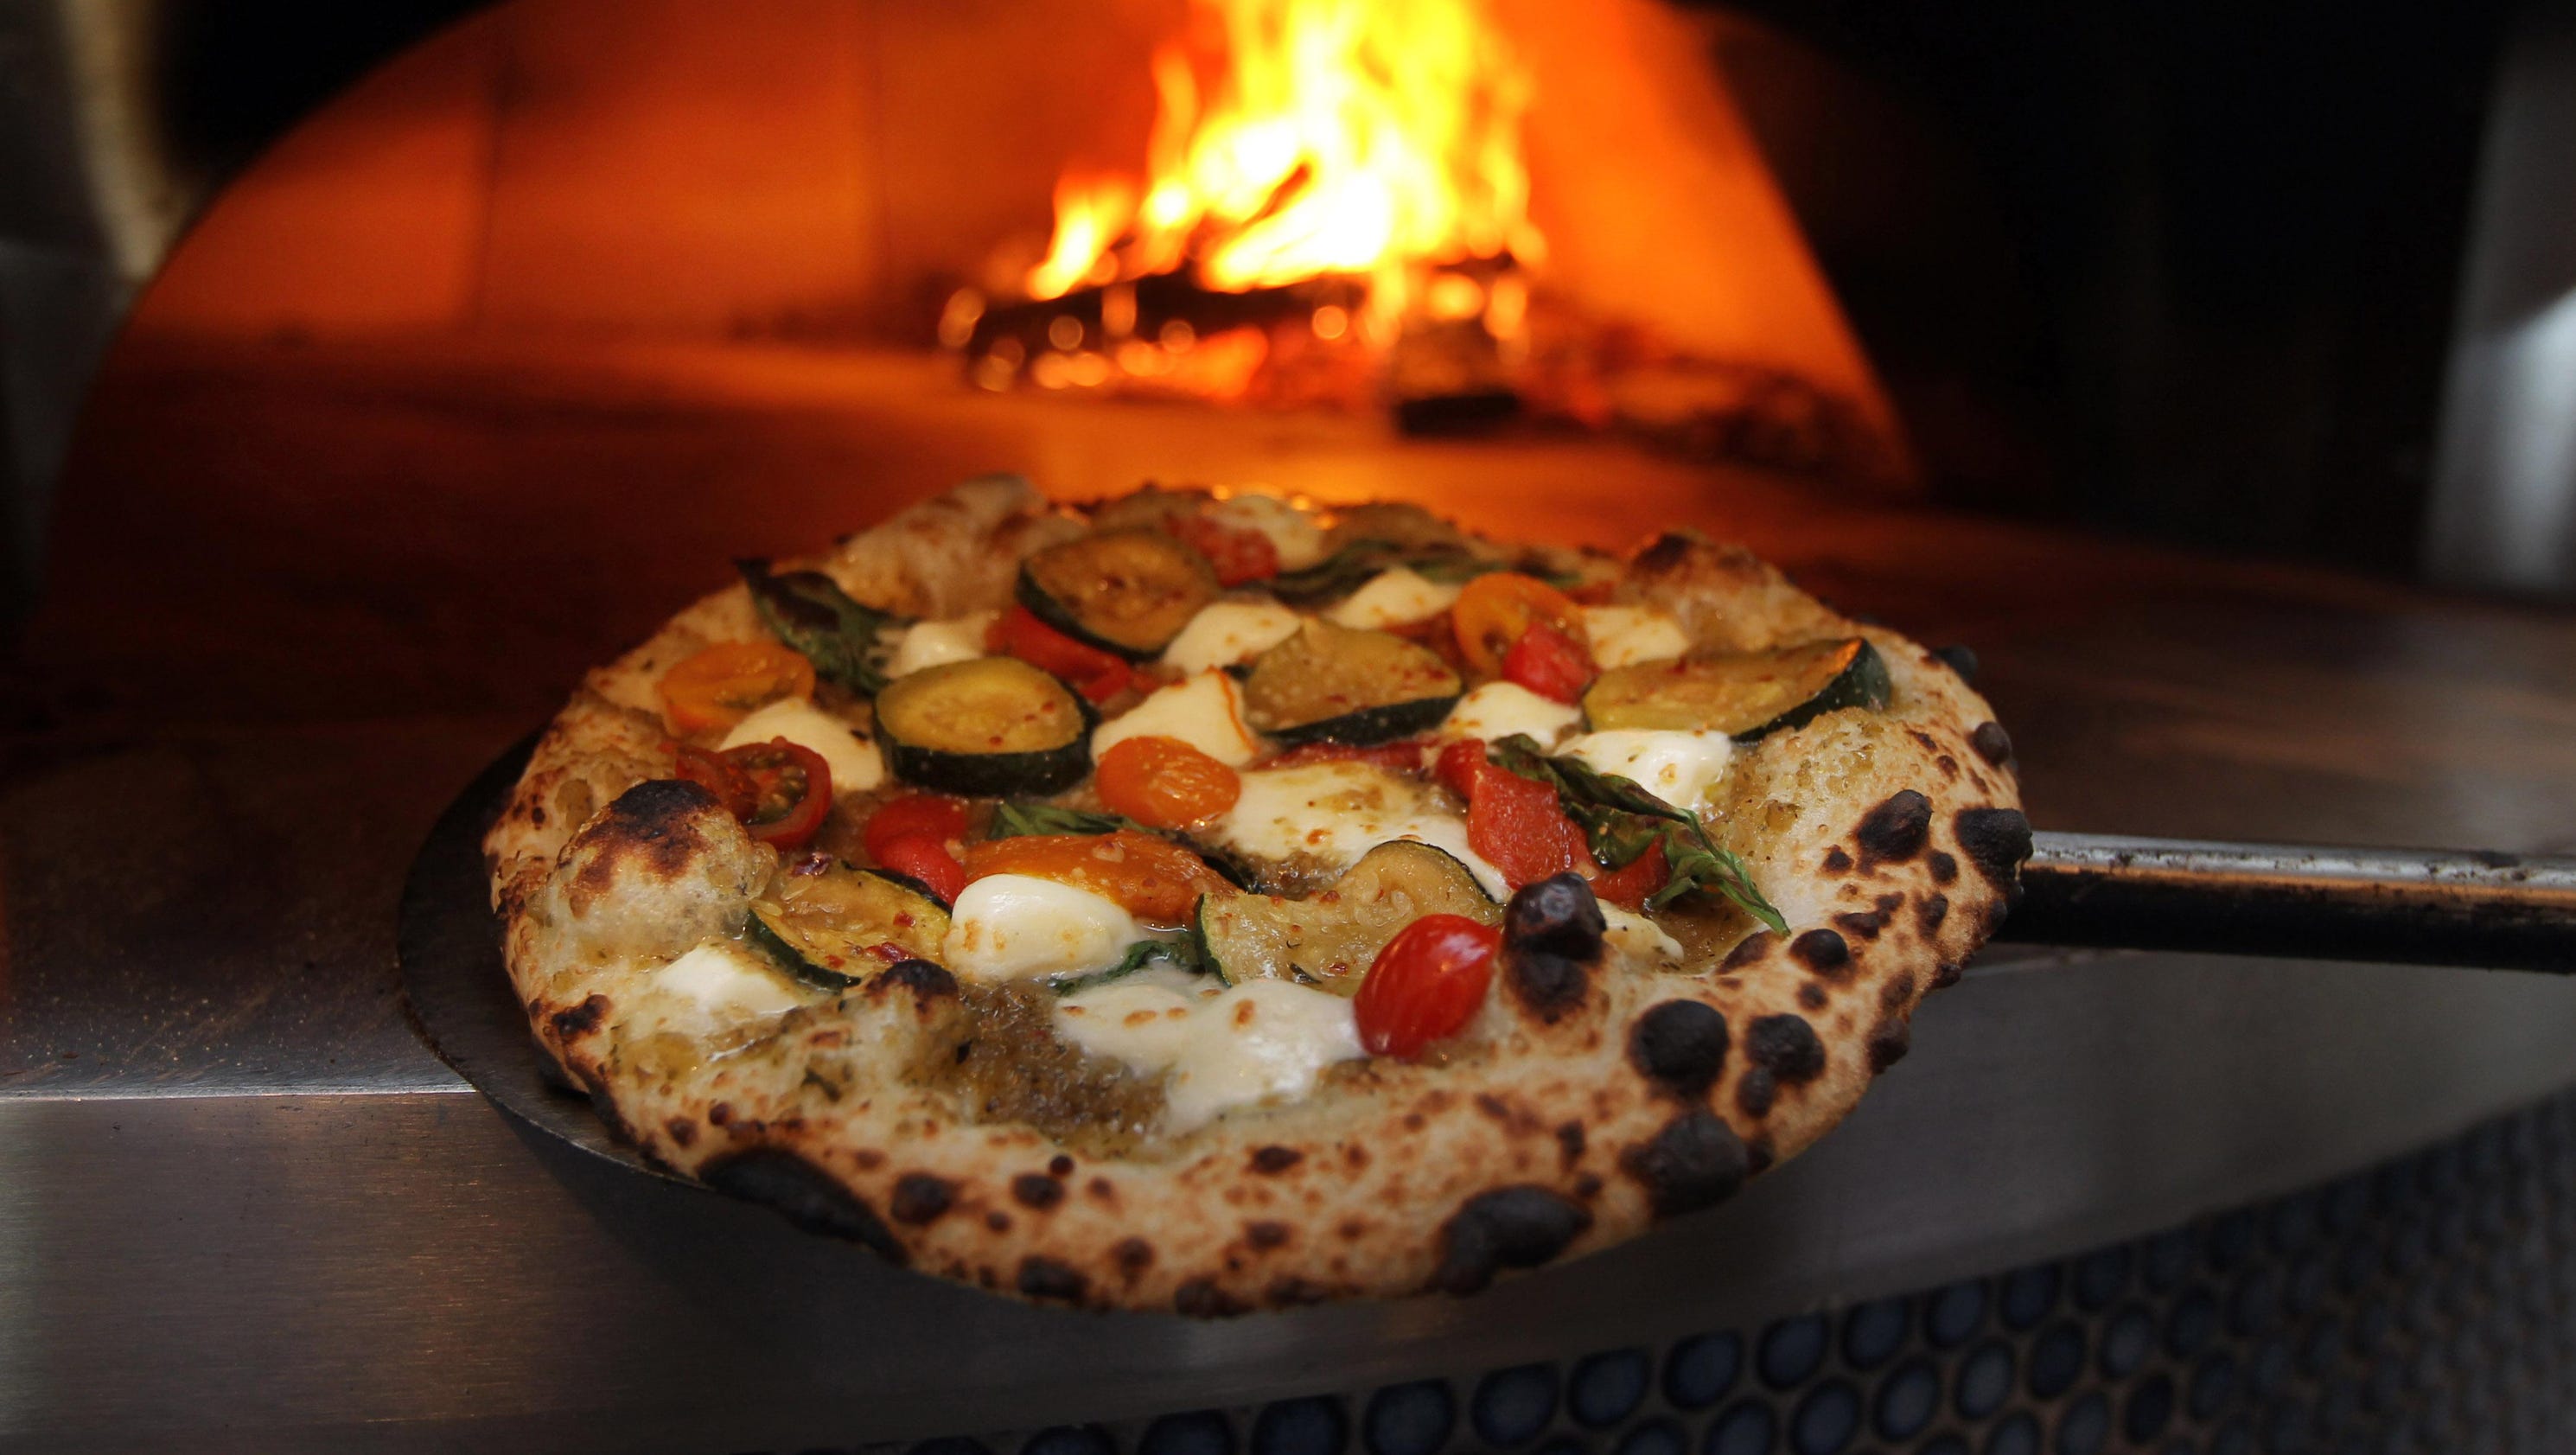 Review 15 North brings woodfired pizza to Ft. Thomas